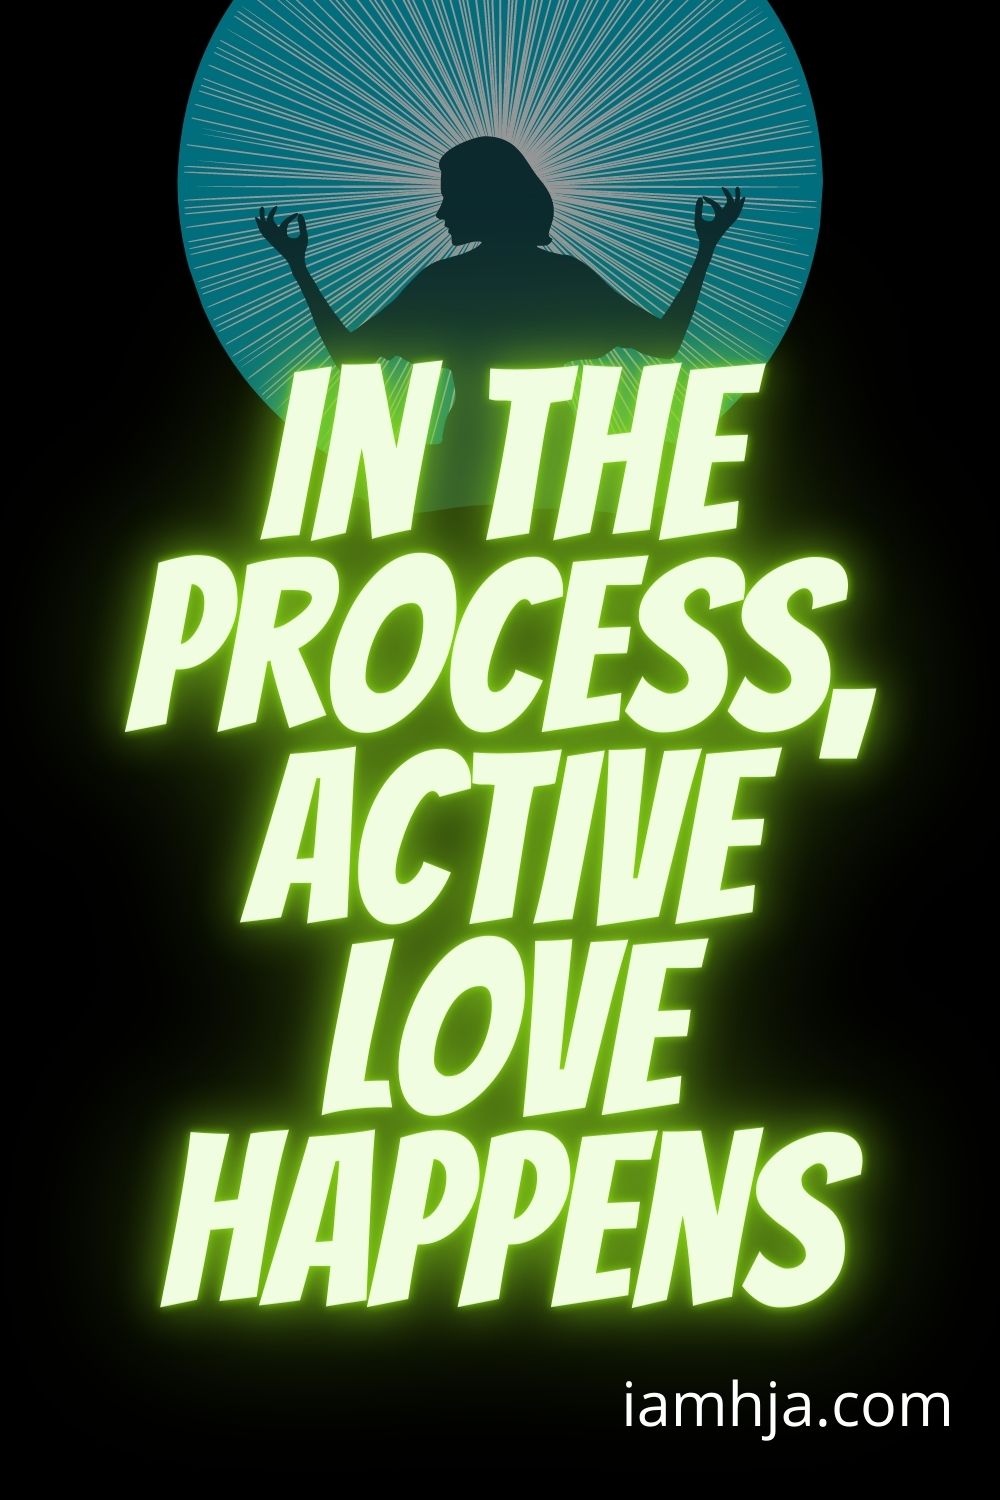 Spiritual Quotes: In the process, active love happens